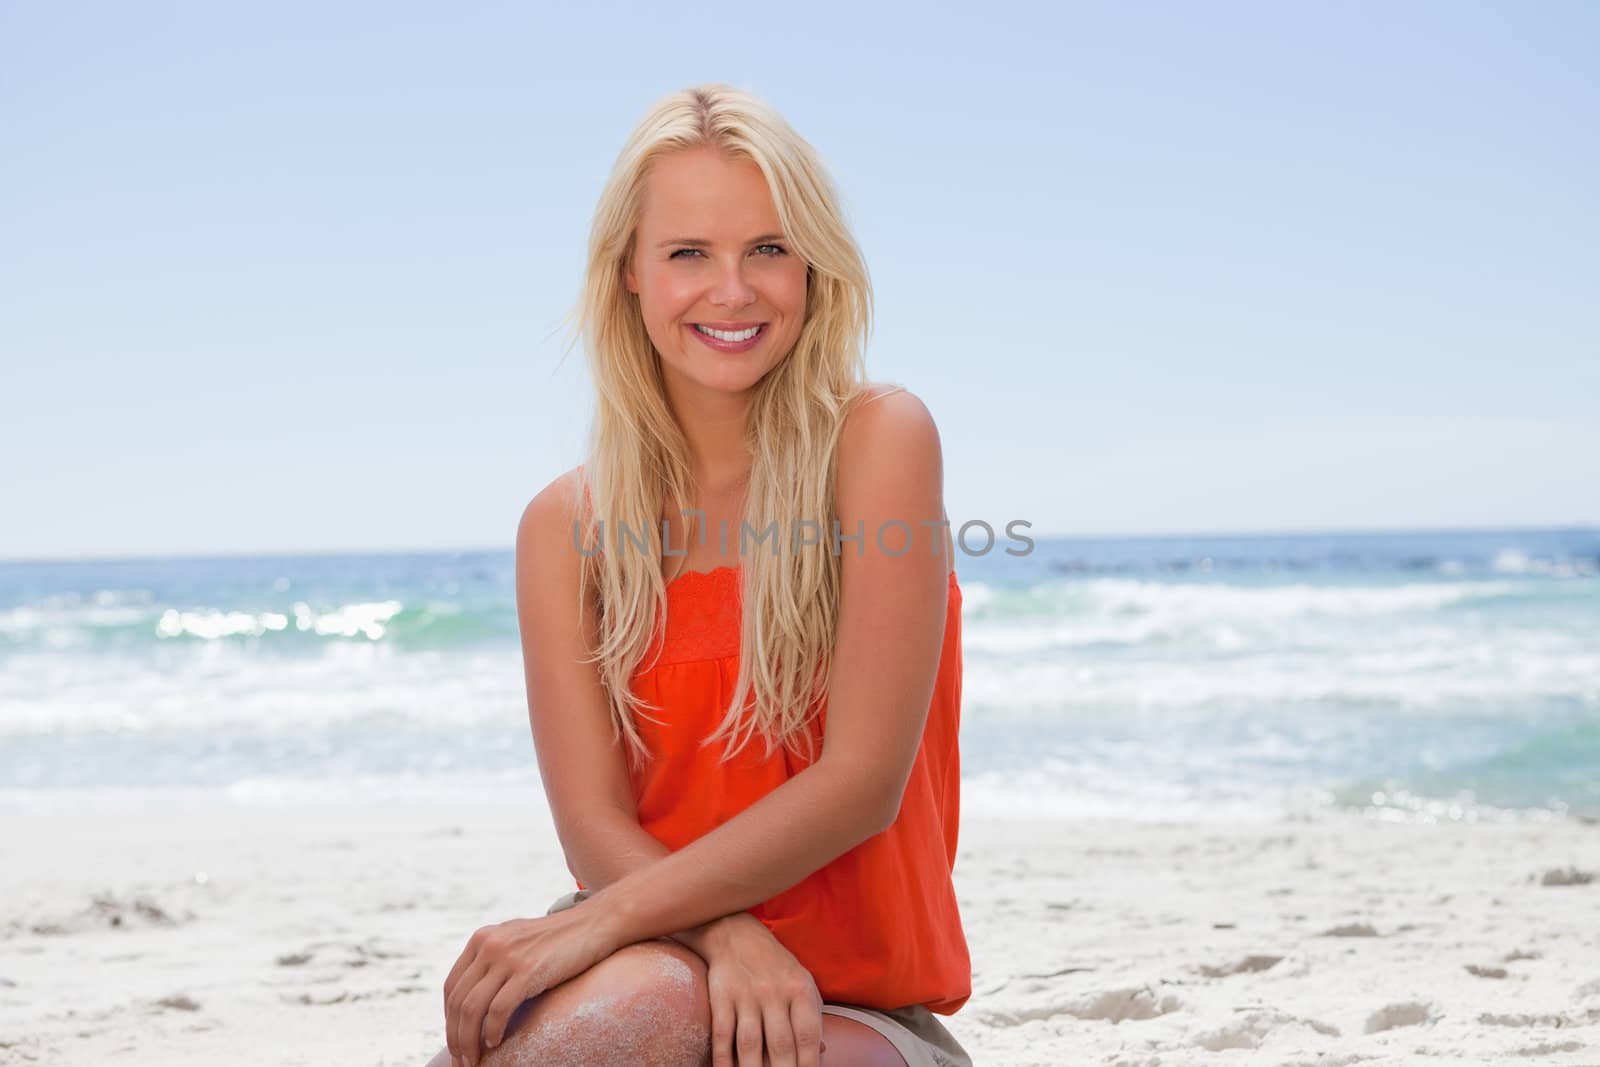 Young woman sitting down in front of the ocean while showing a great smile